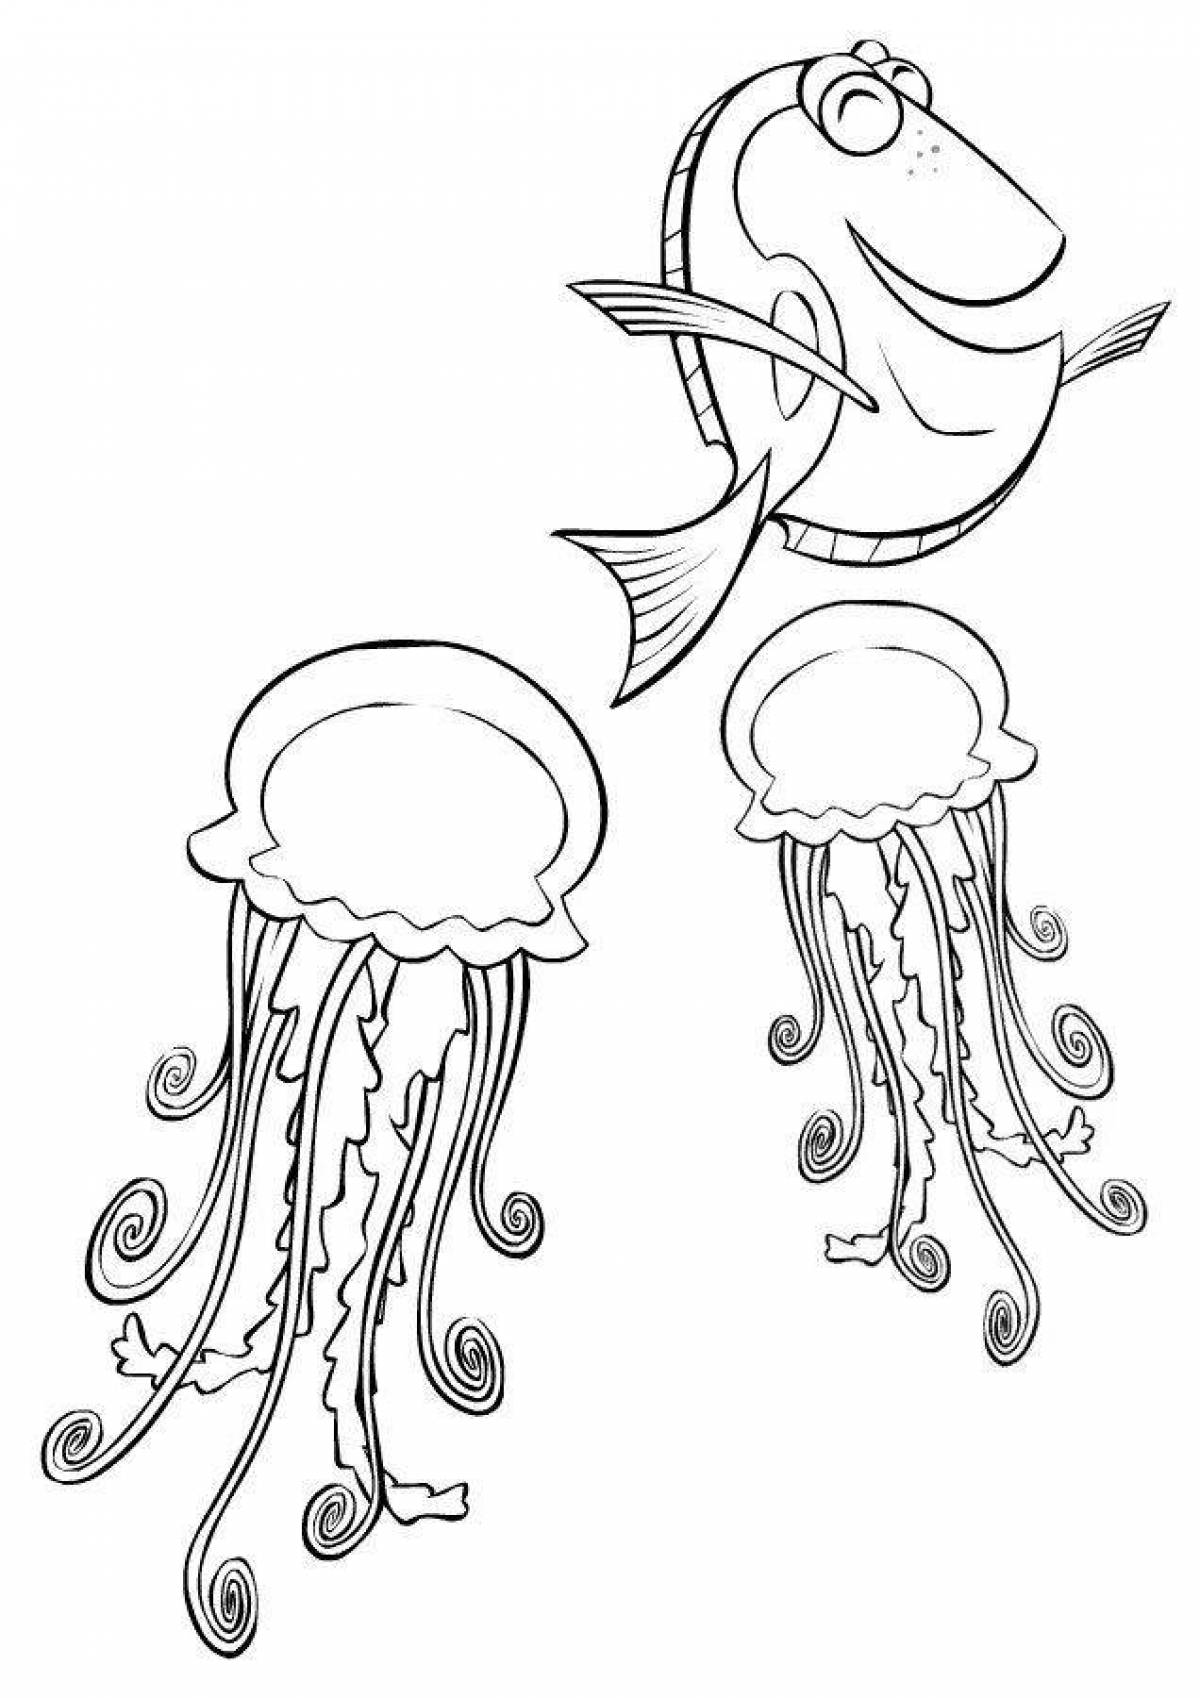 Jellyfish coloring book for kids